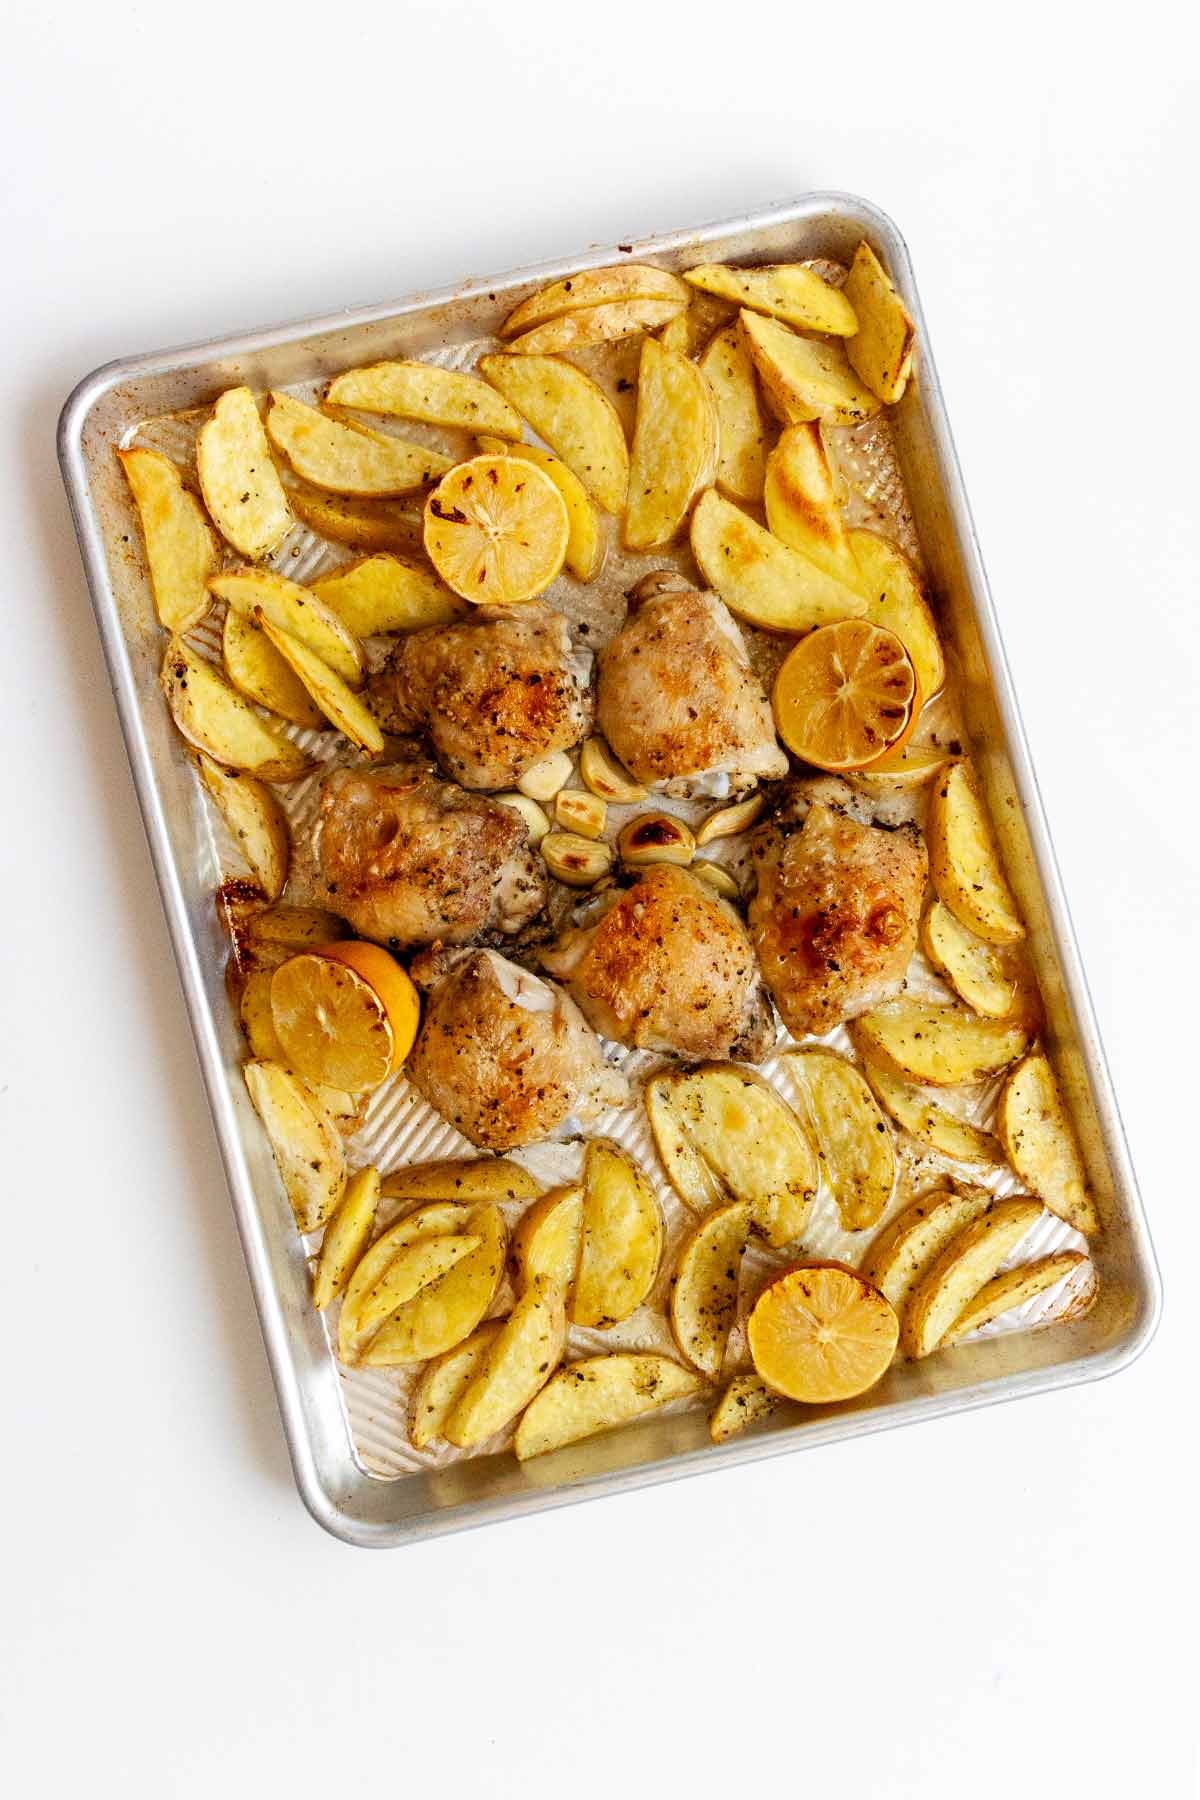 A sheet pan filled with roasted potato wedges, lemon halves and crispy chicken thighs.